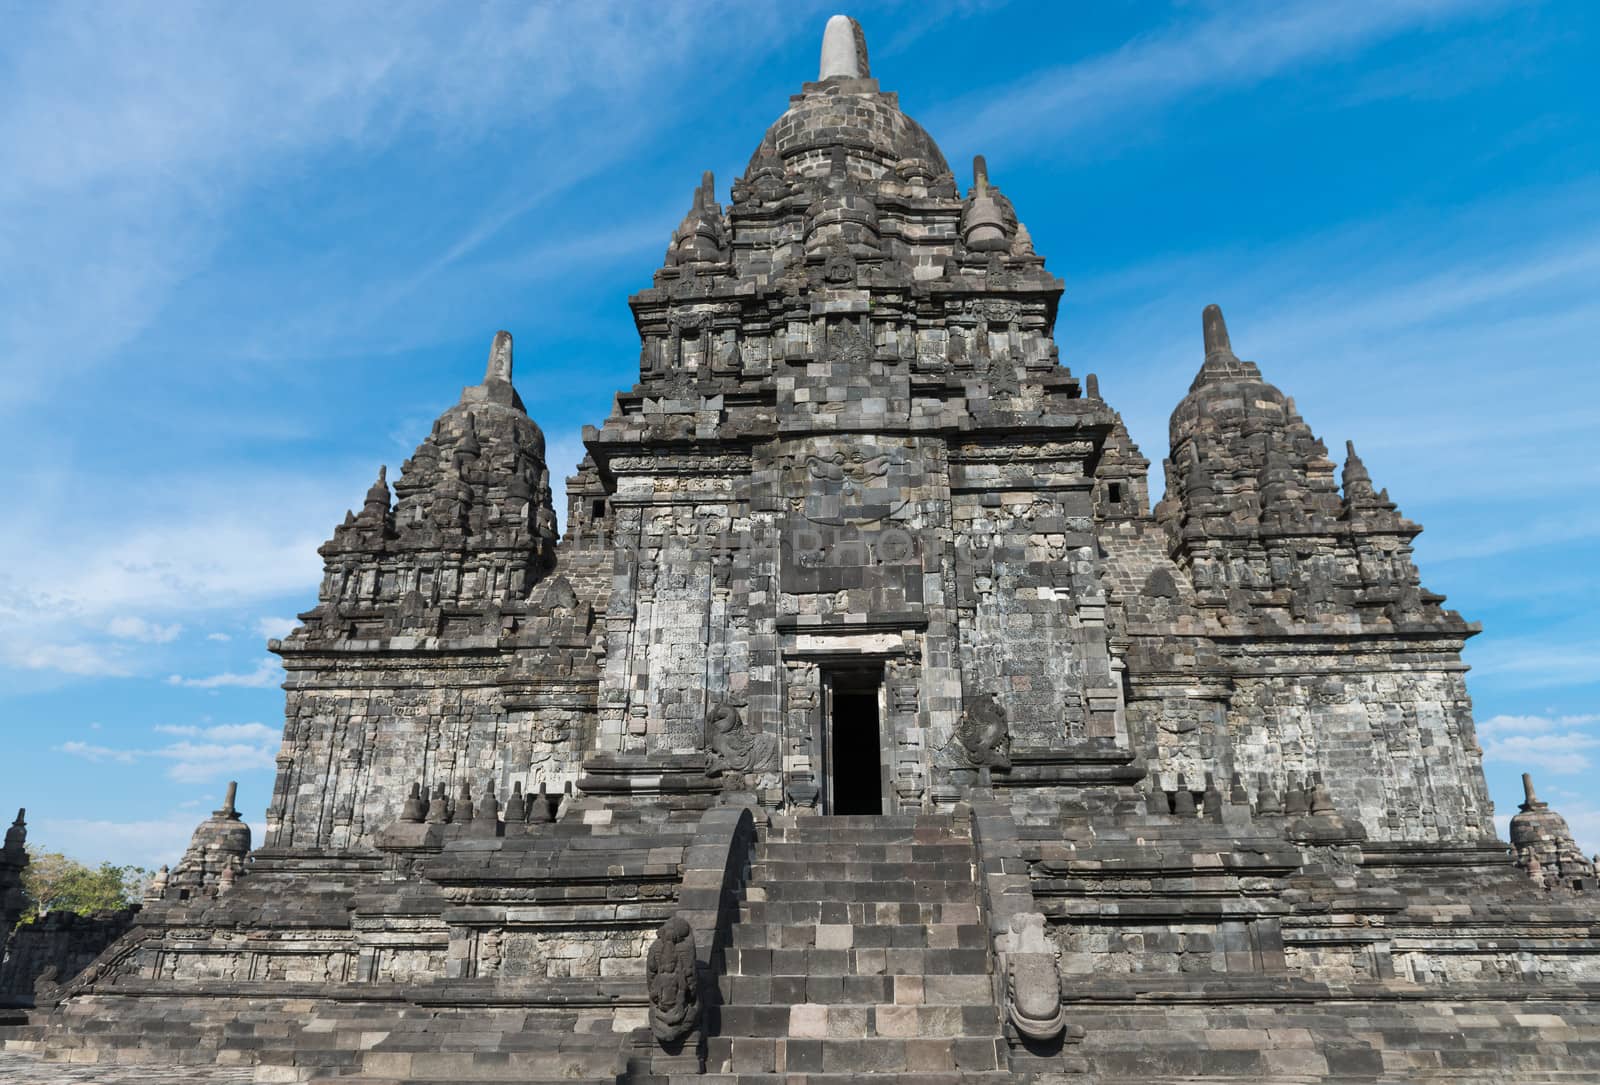 Main temple in Candi Sewu complex. Candi Sewu means 1000 temples, which links it to the legend of Loro Djonggrang. In fact this complex has 253 building structures (8th Century) and it is the second largest Buddhist temple in Java, Indonesia.